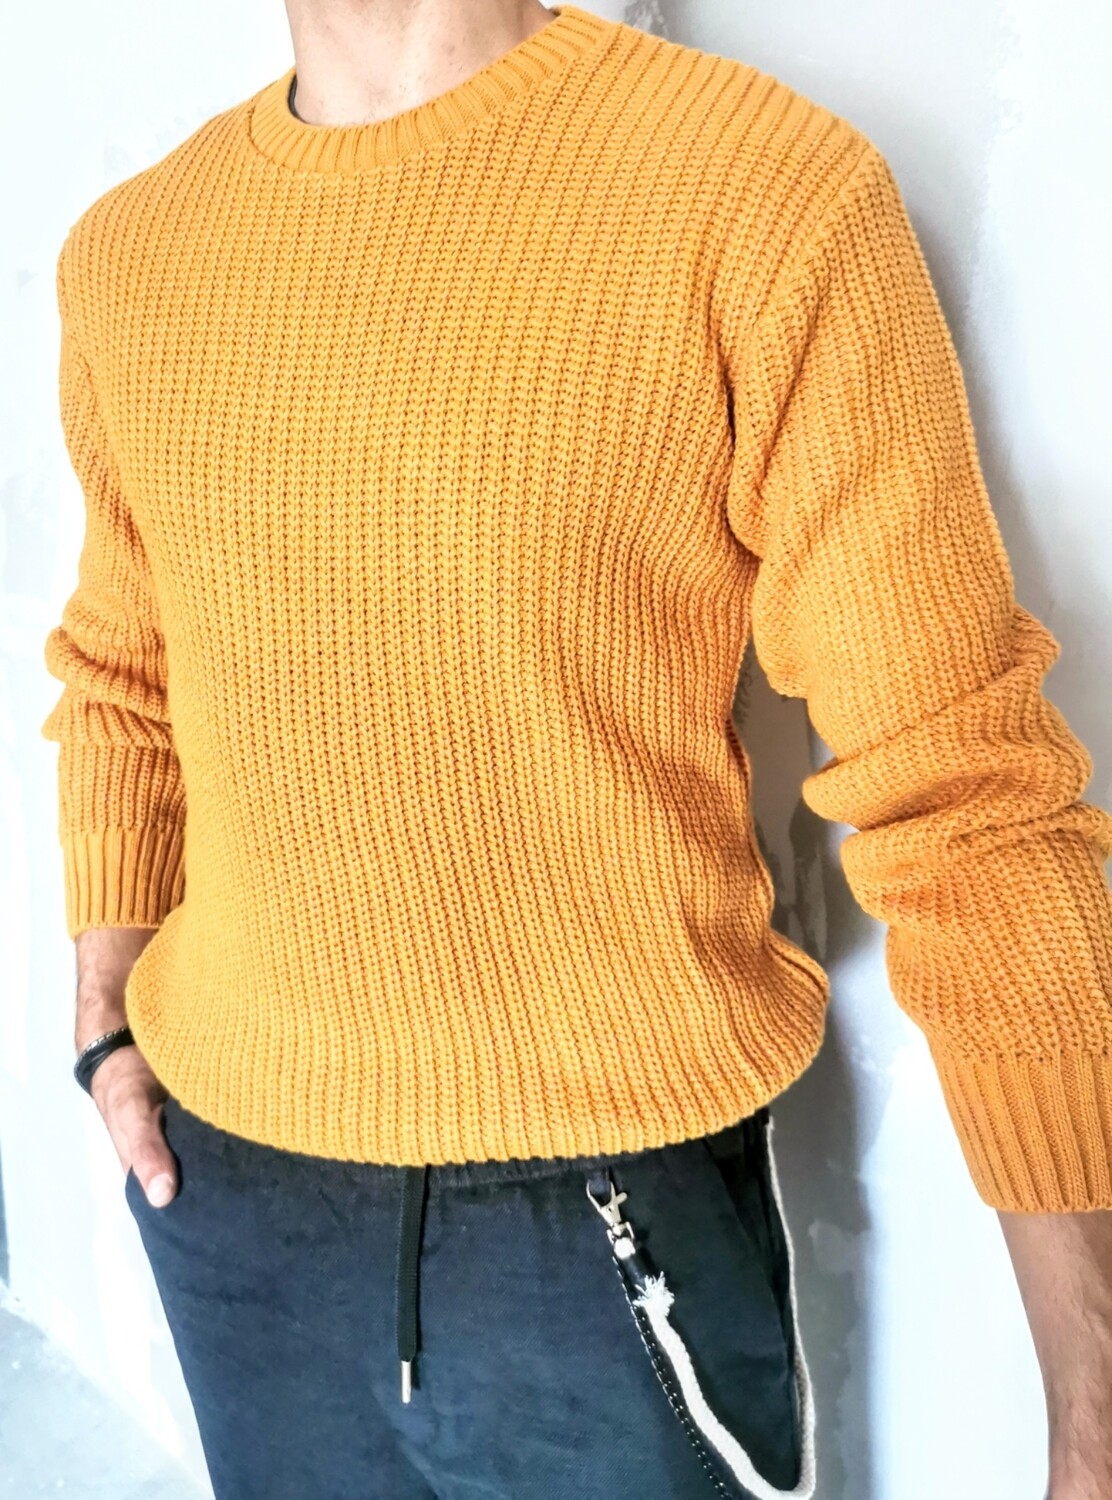 Regular ribbed sweater with crew neck